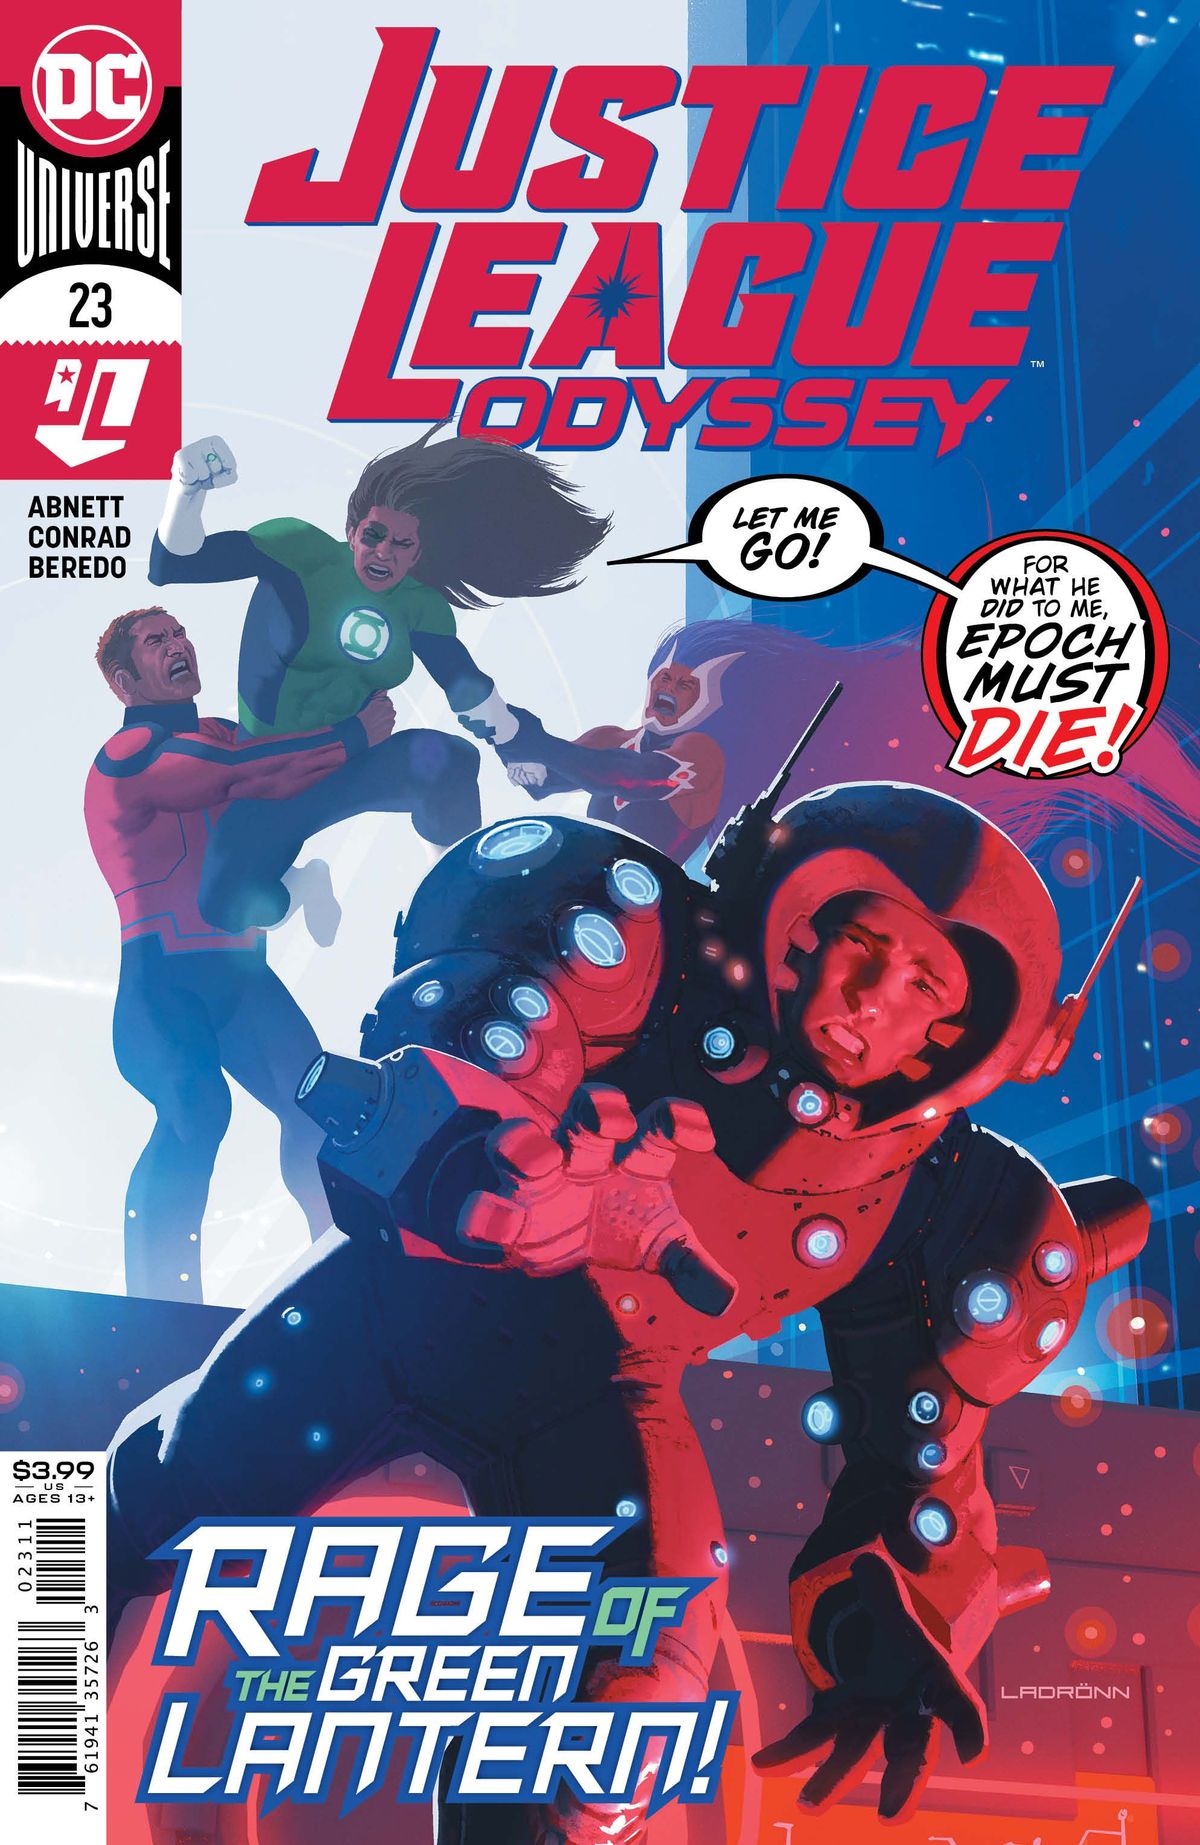 FORHOLD: Justice League Odyssey # 23